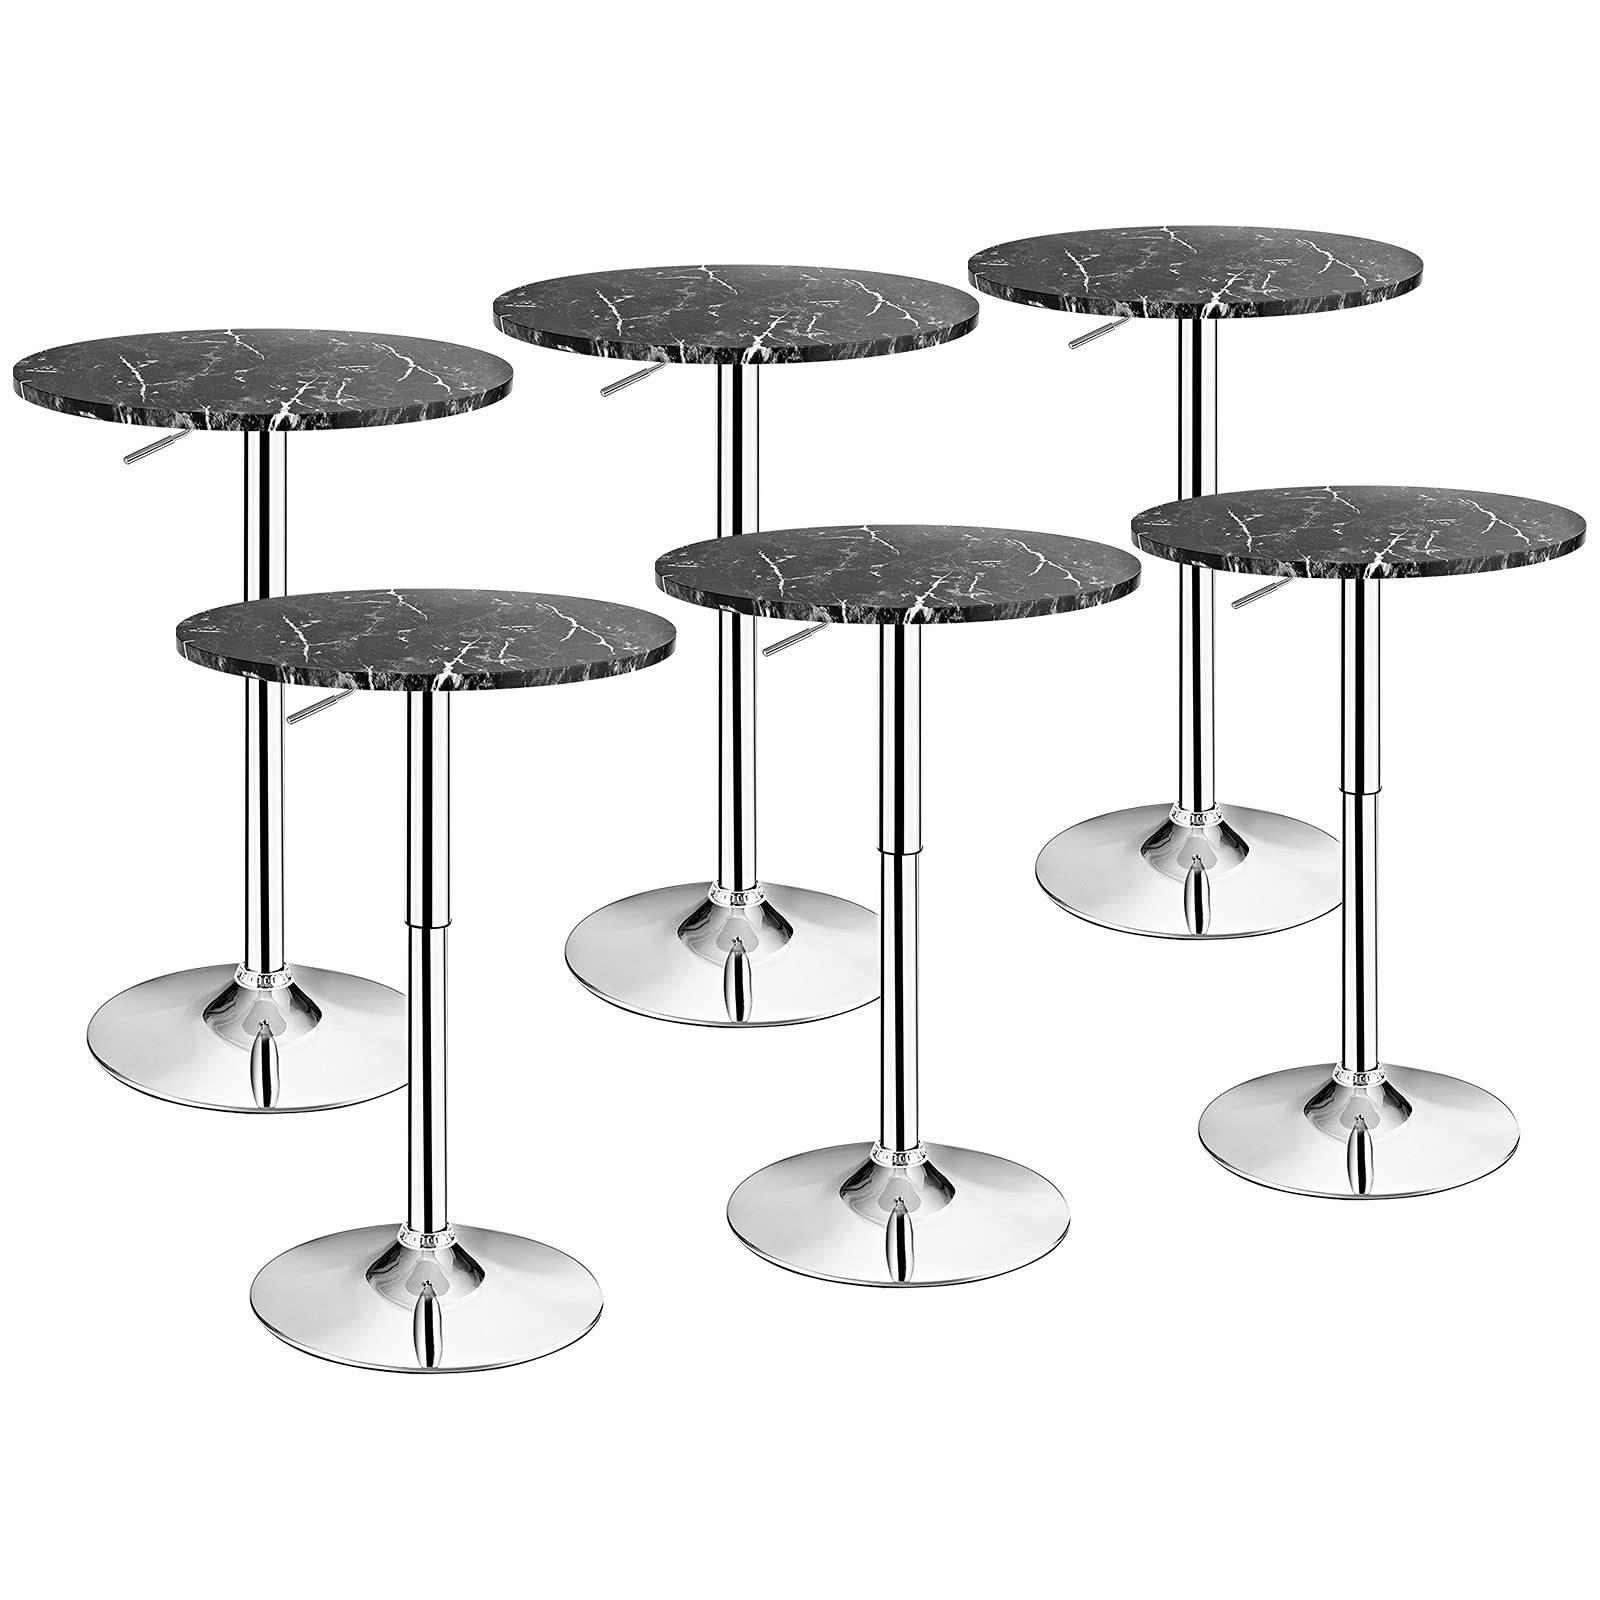 Giantex Round Pub Table Height Adjustable, 360? Swivel Cocktail Pub Table with Sliver Leg and Base for Home, Office Bar Table(6,